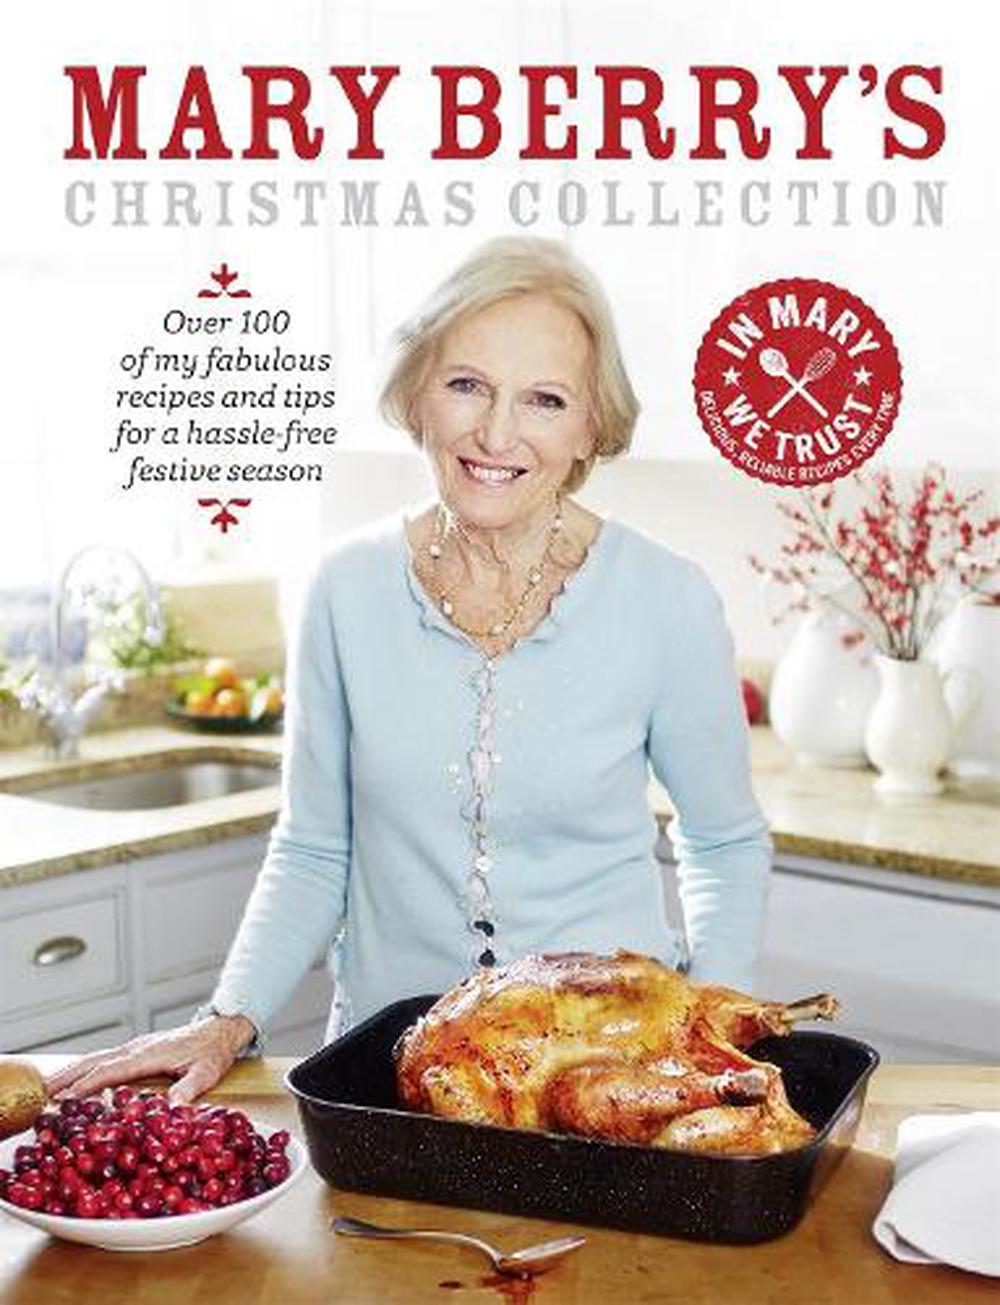 Mary Berry's Christmas Collection by Mary Berry, Hardcover ...